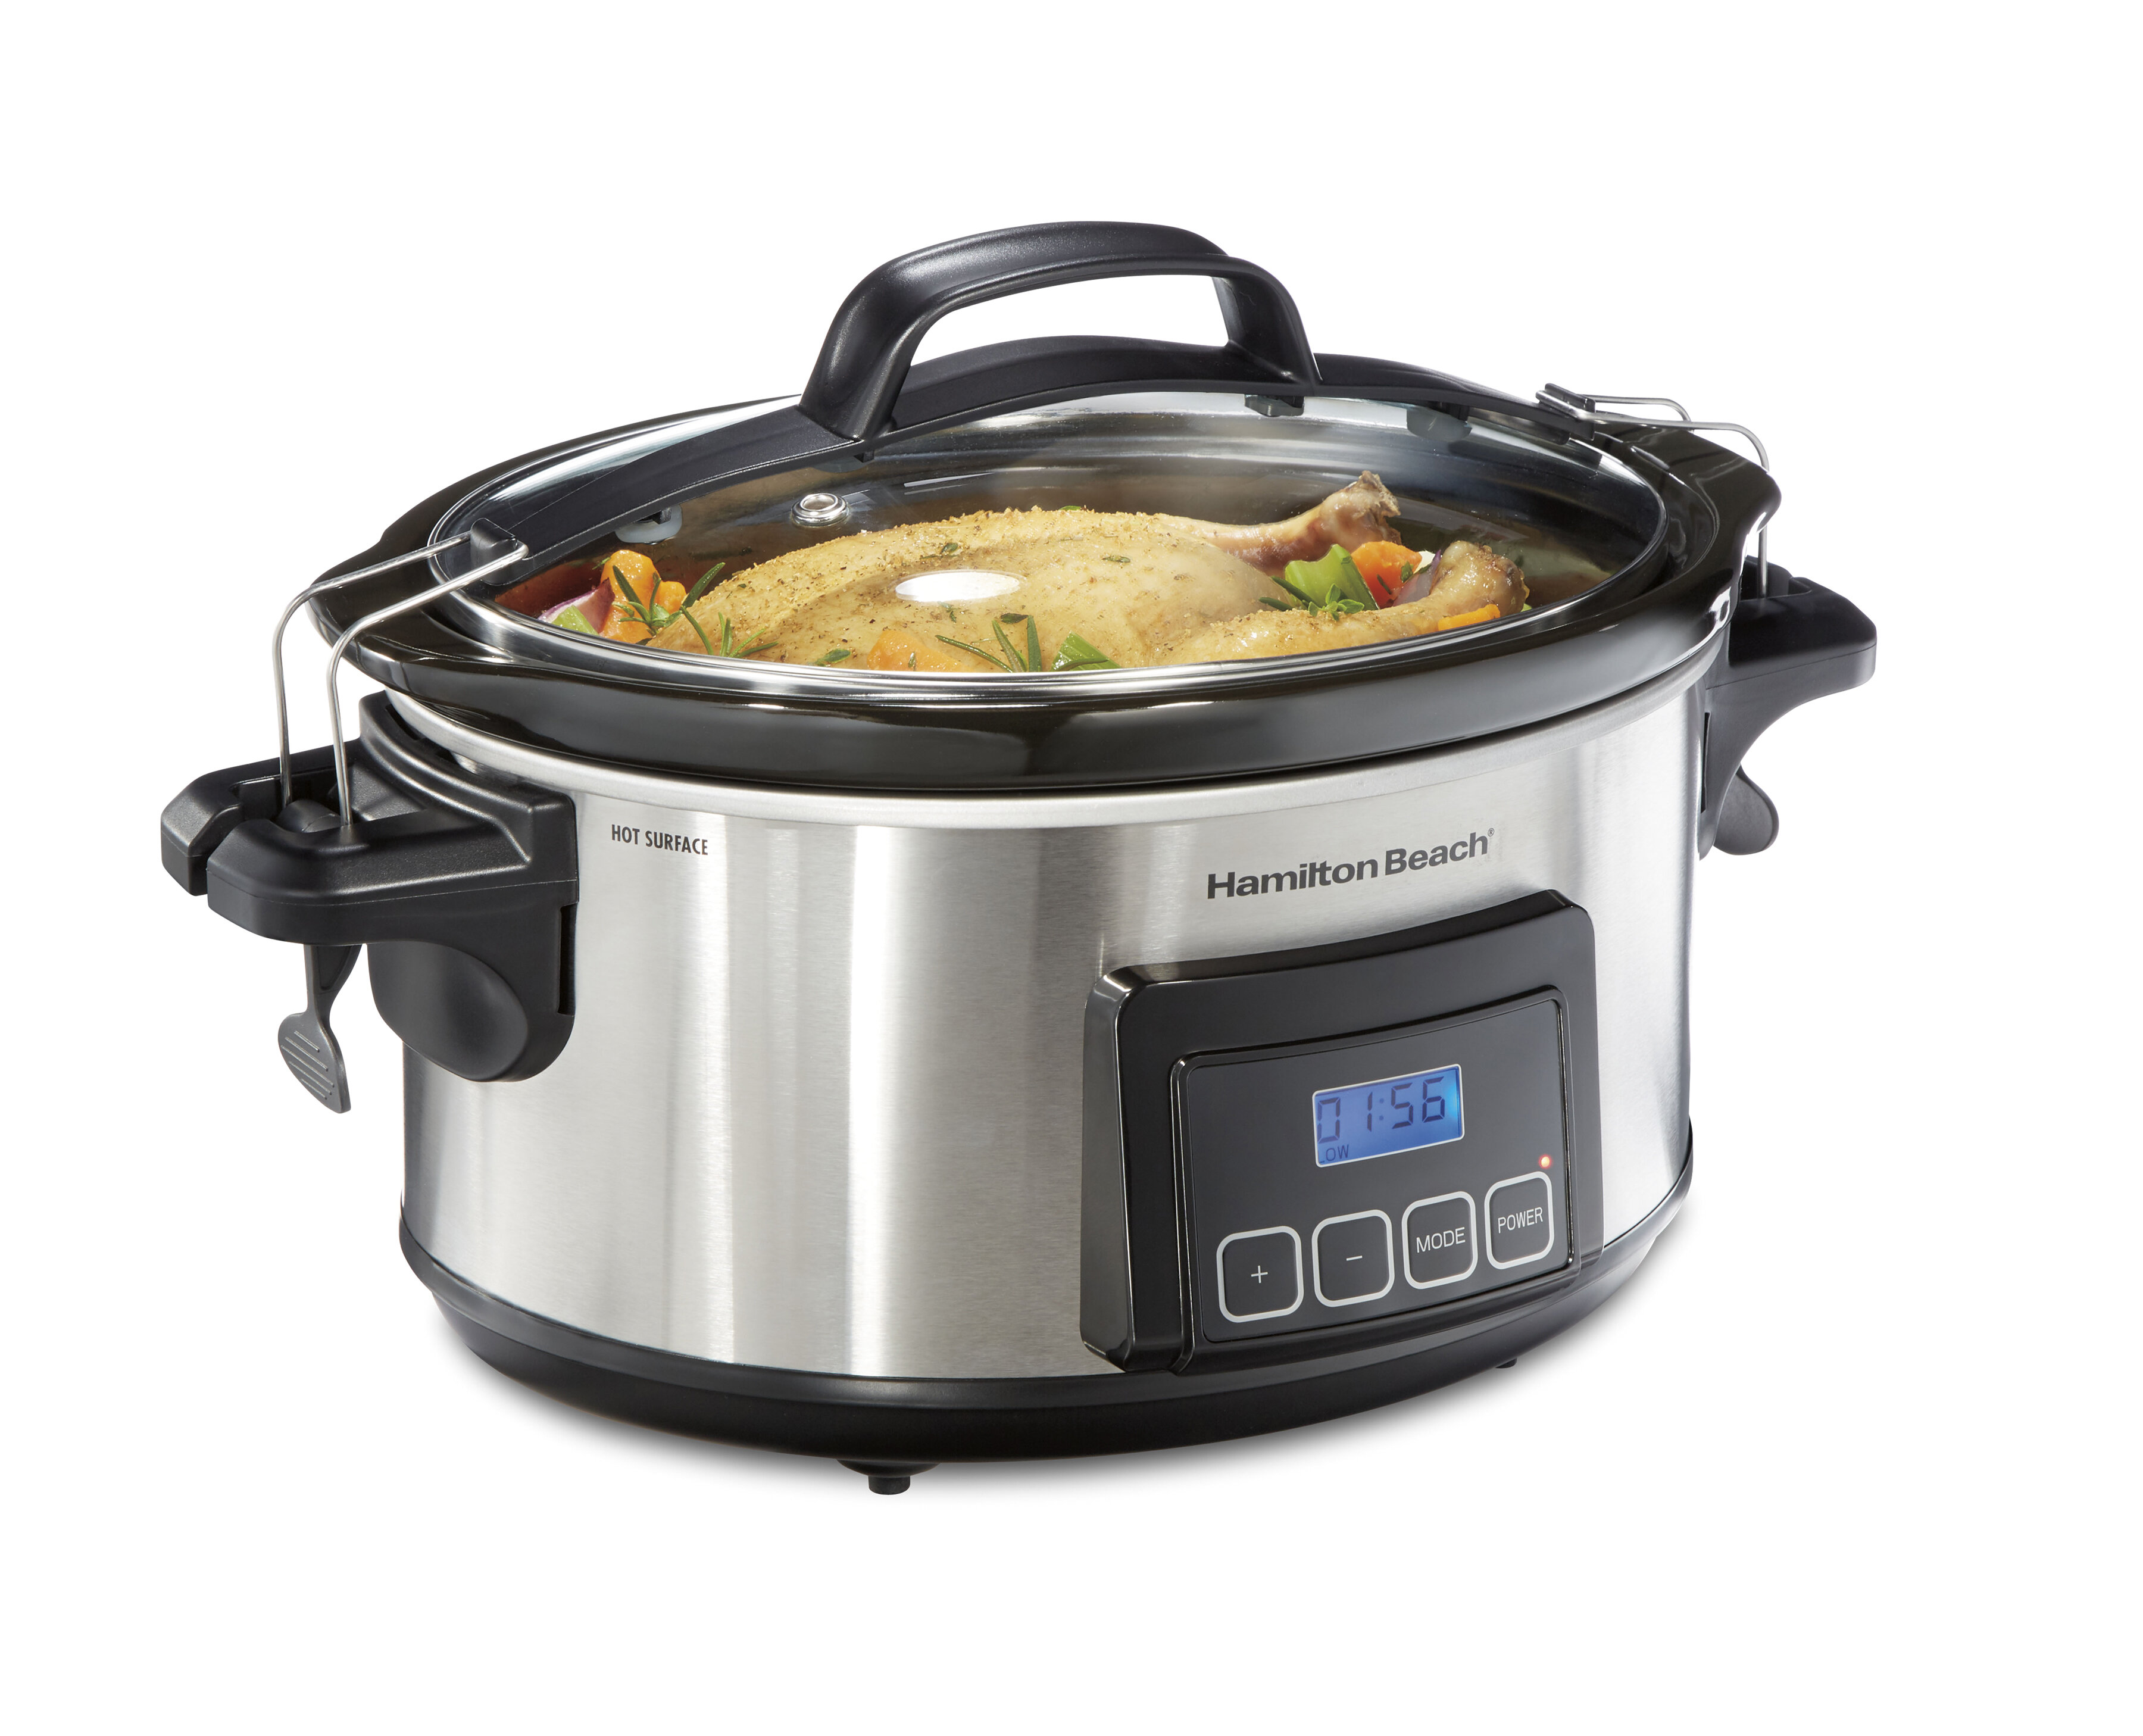 Crock-Pot ThermoShield Cook and Carry 6-Quart Slow Cooker Black SCCPCT600-B  - Best Buy